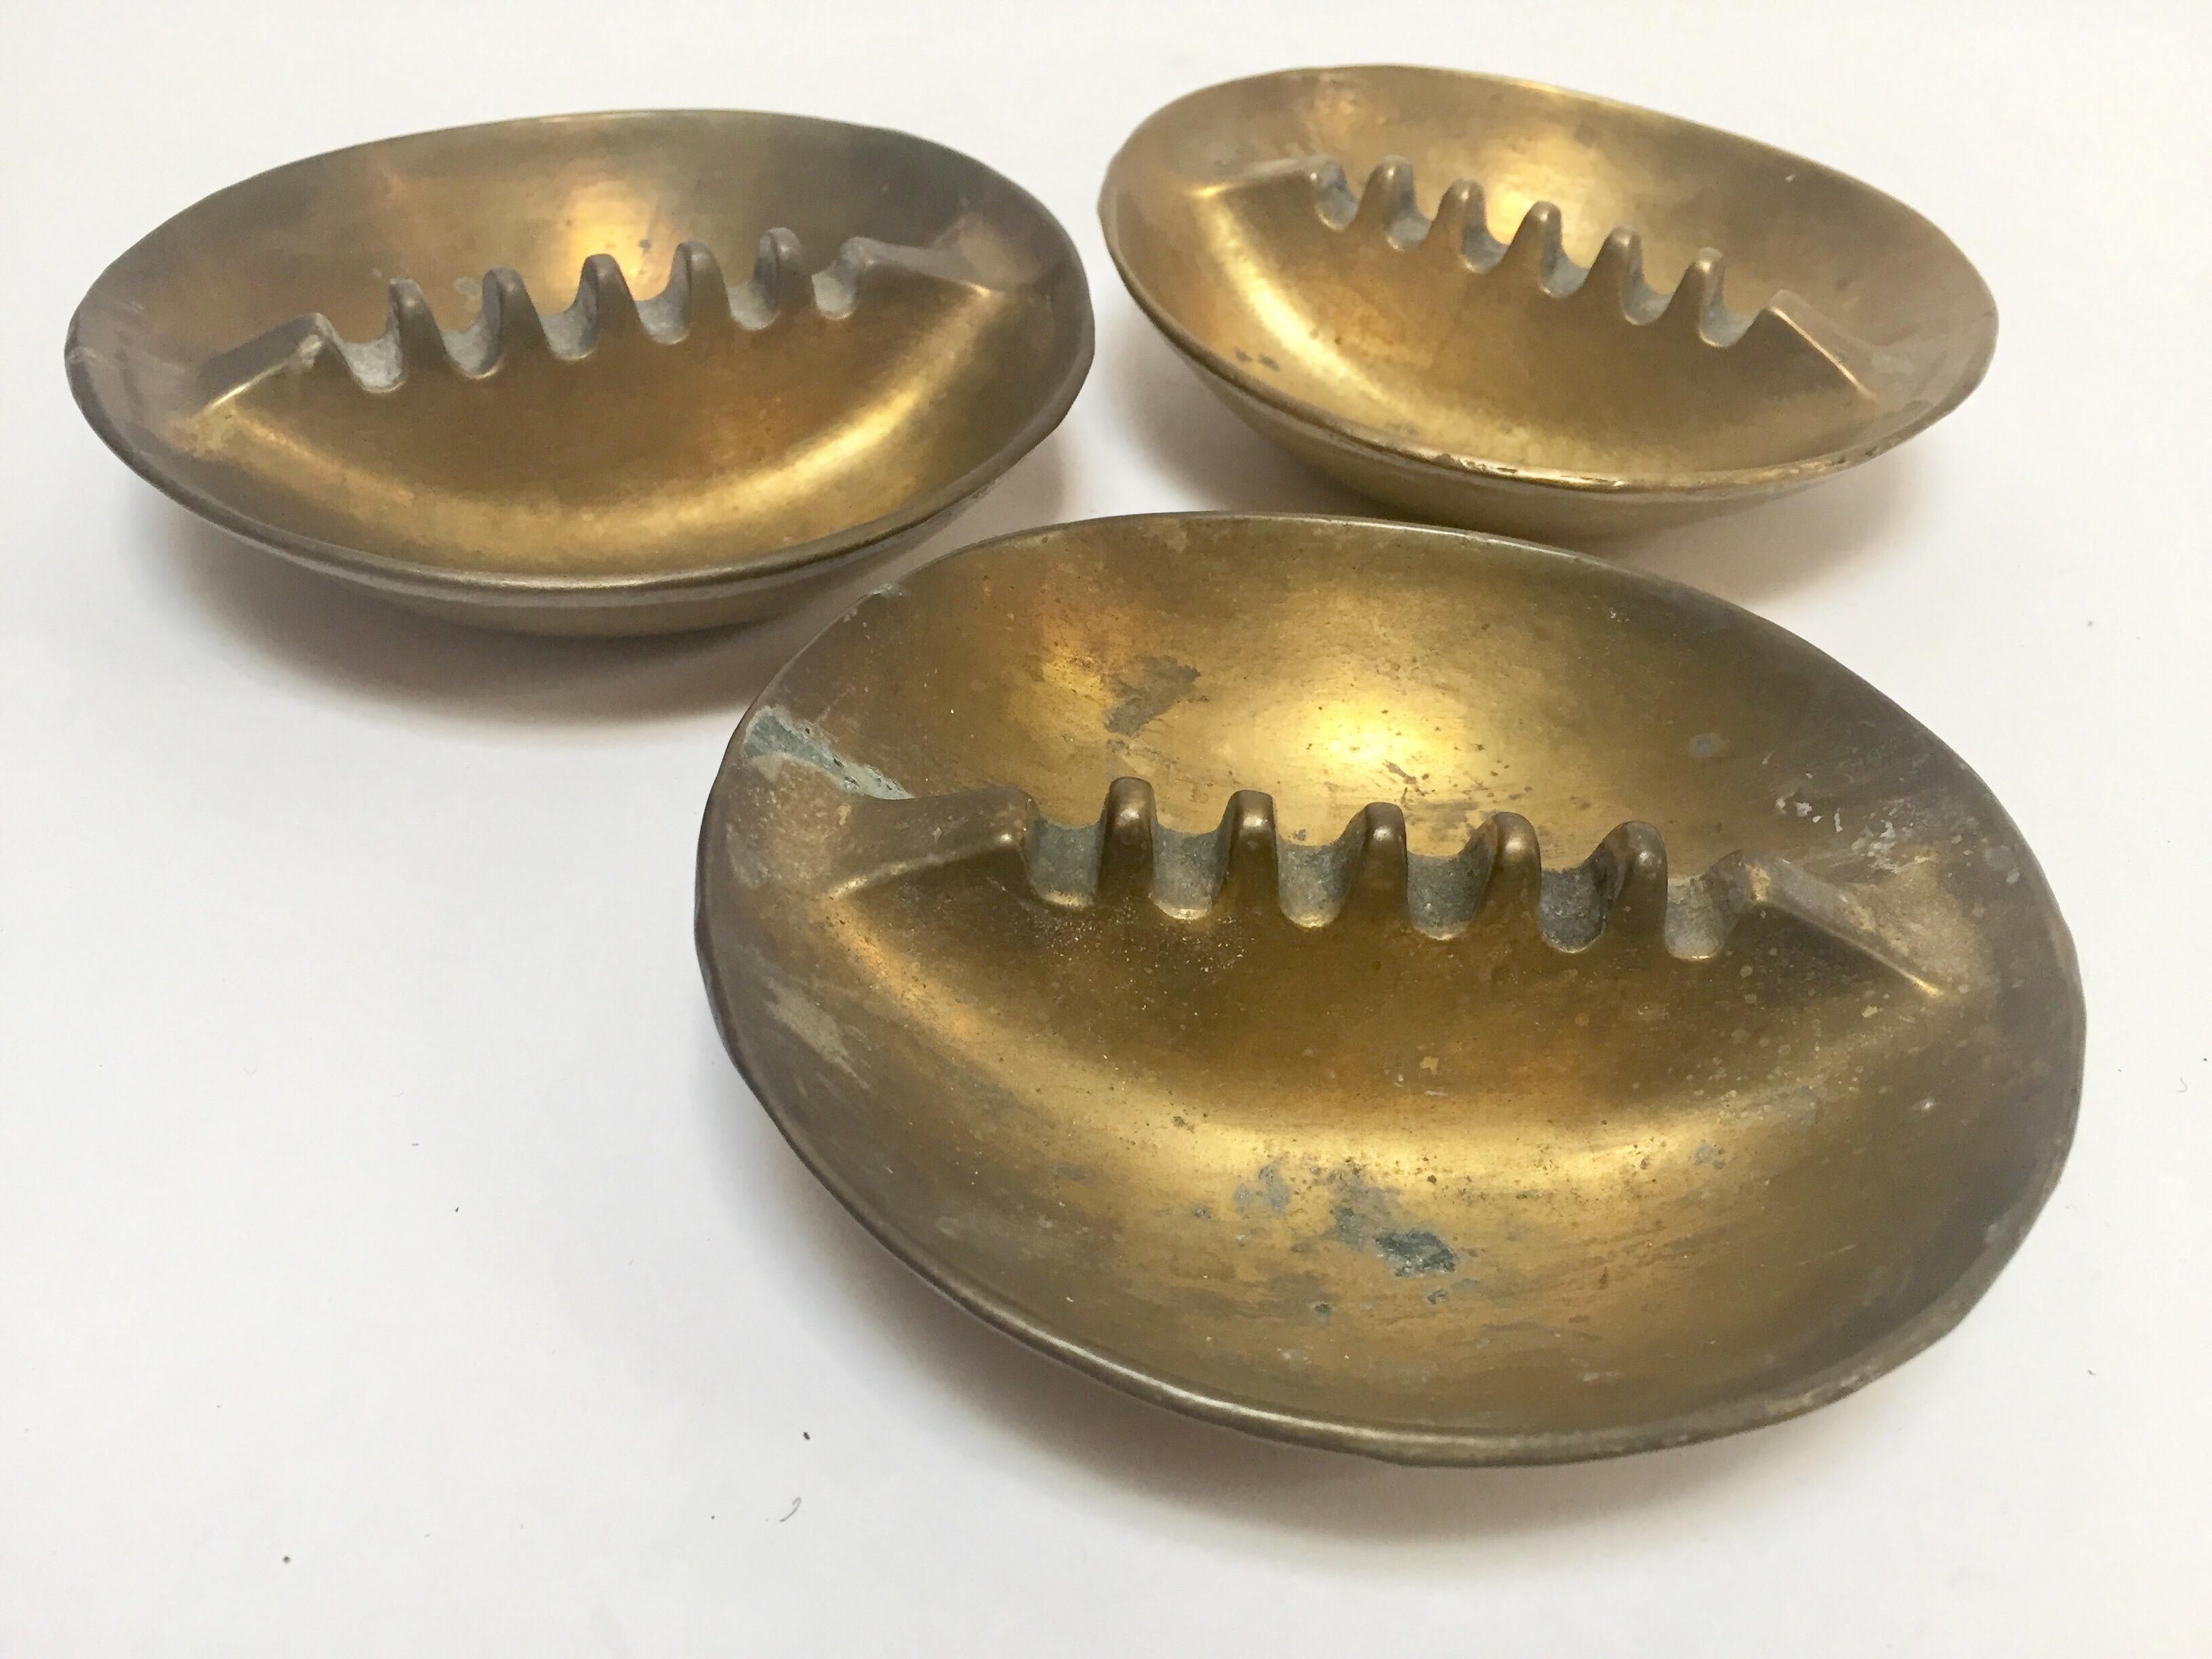 Set of three vintage 1960 solid brass ashtrays.
Handmade cast brass with beautiful bronze patina finish. 1960 solid brass ashtray, brass sculptures, vide poche, decorative object.
A vintage midcentury set of three stackable ashtrays with textured